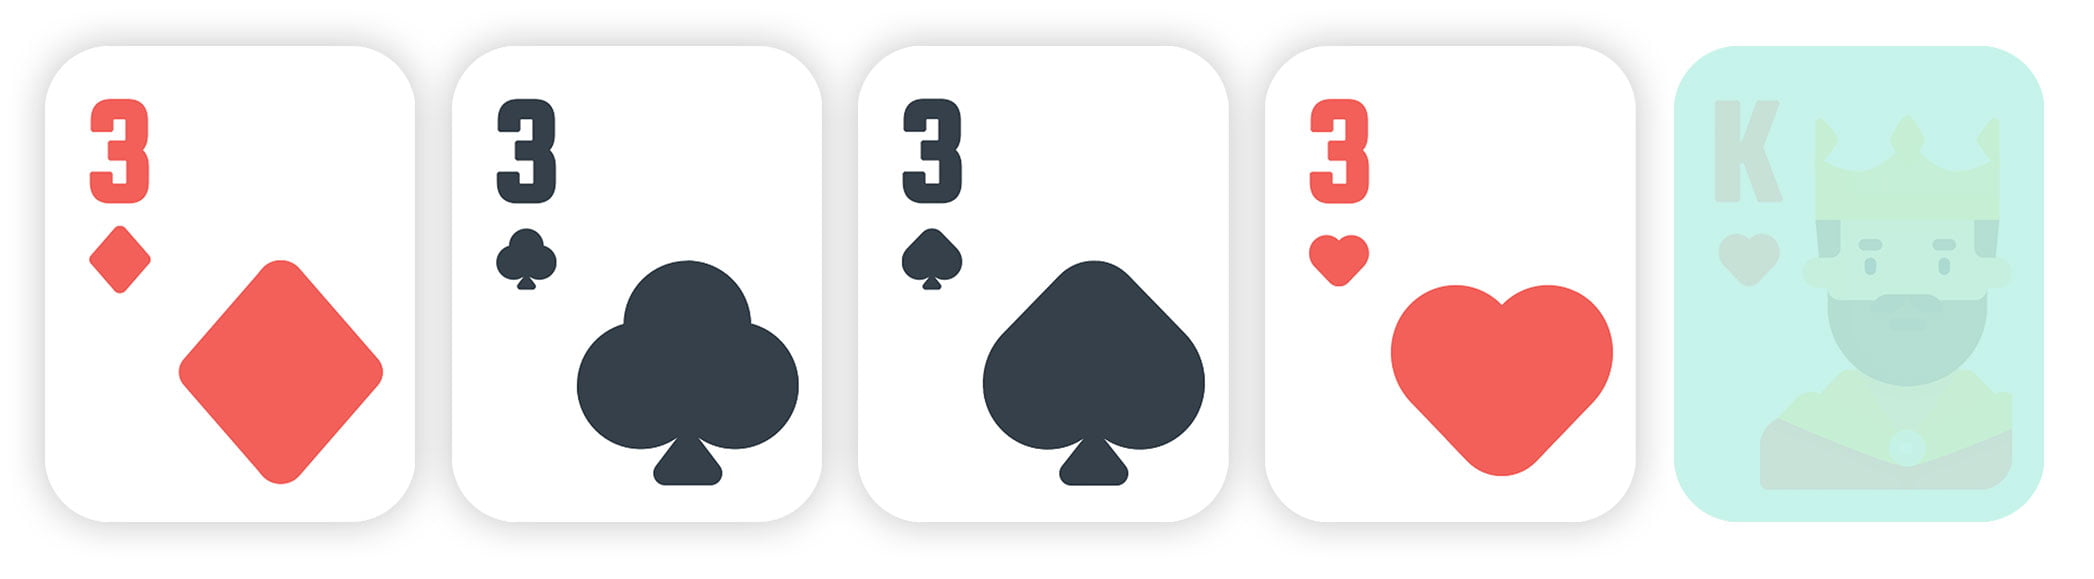 Four of a Kind - How to play poker 